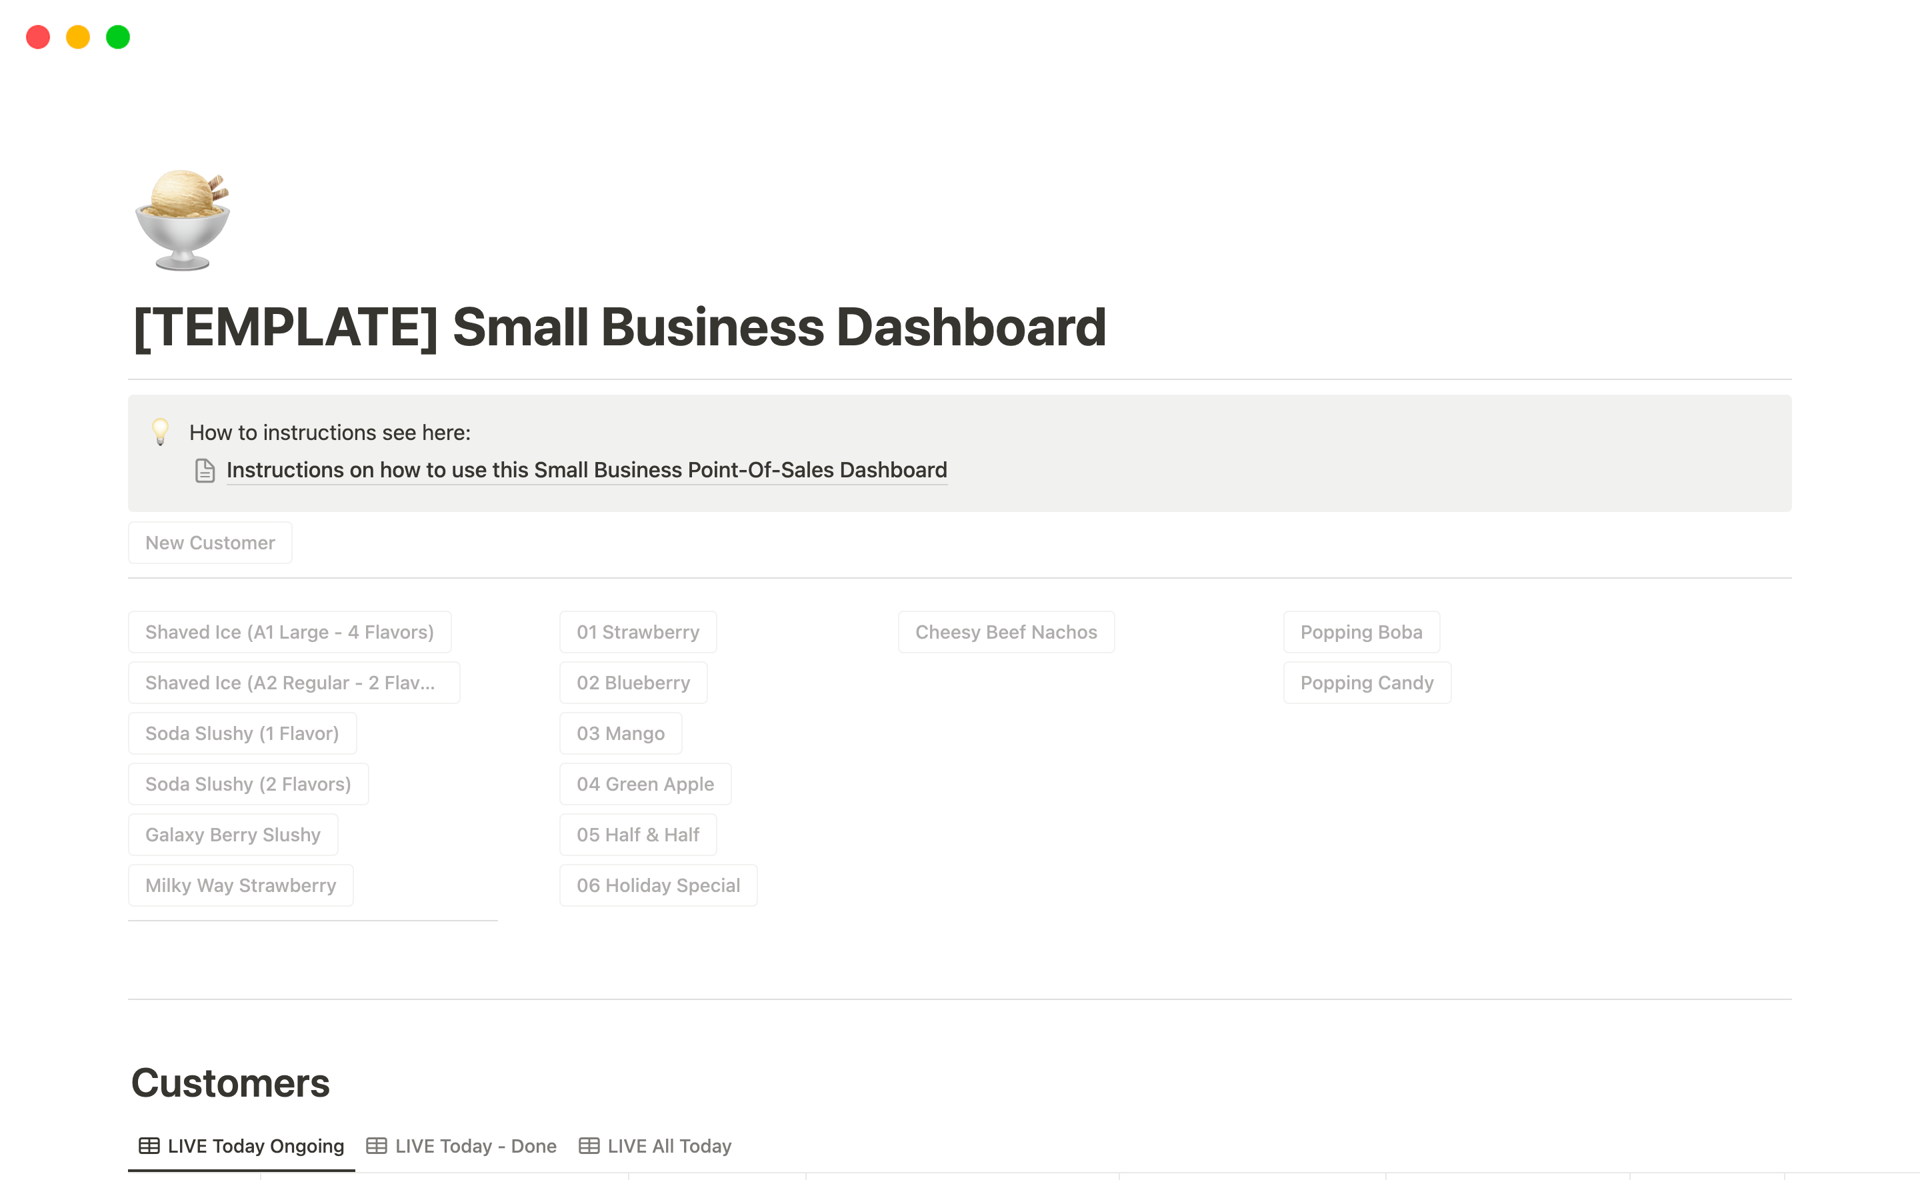 This is a small business dashboard. Good for small lemonade stands.